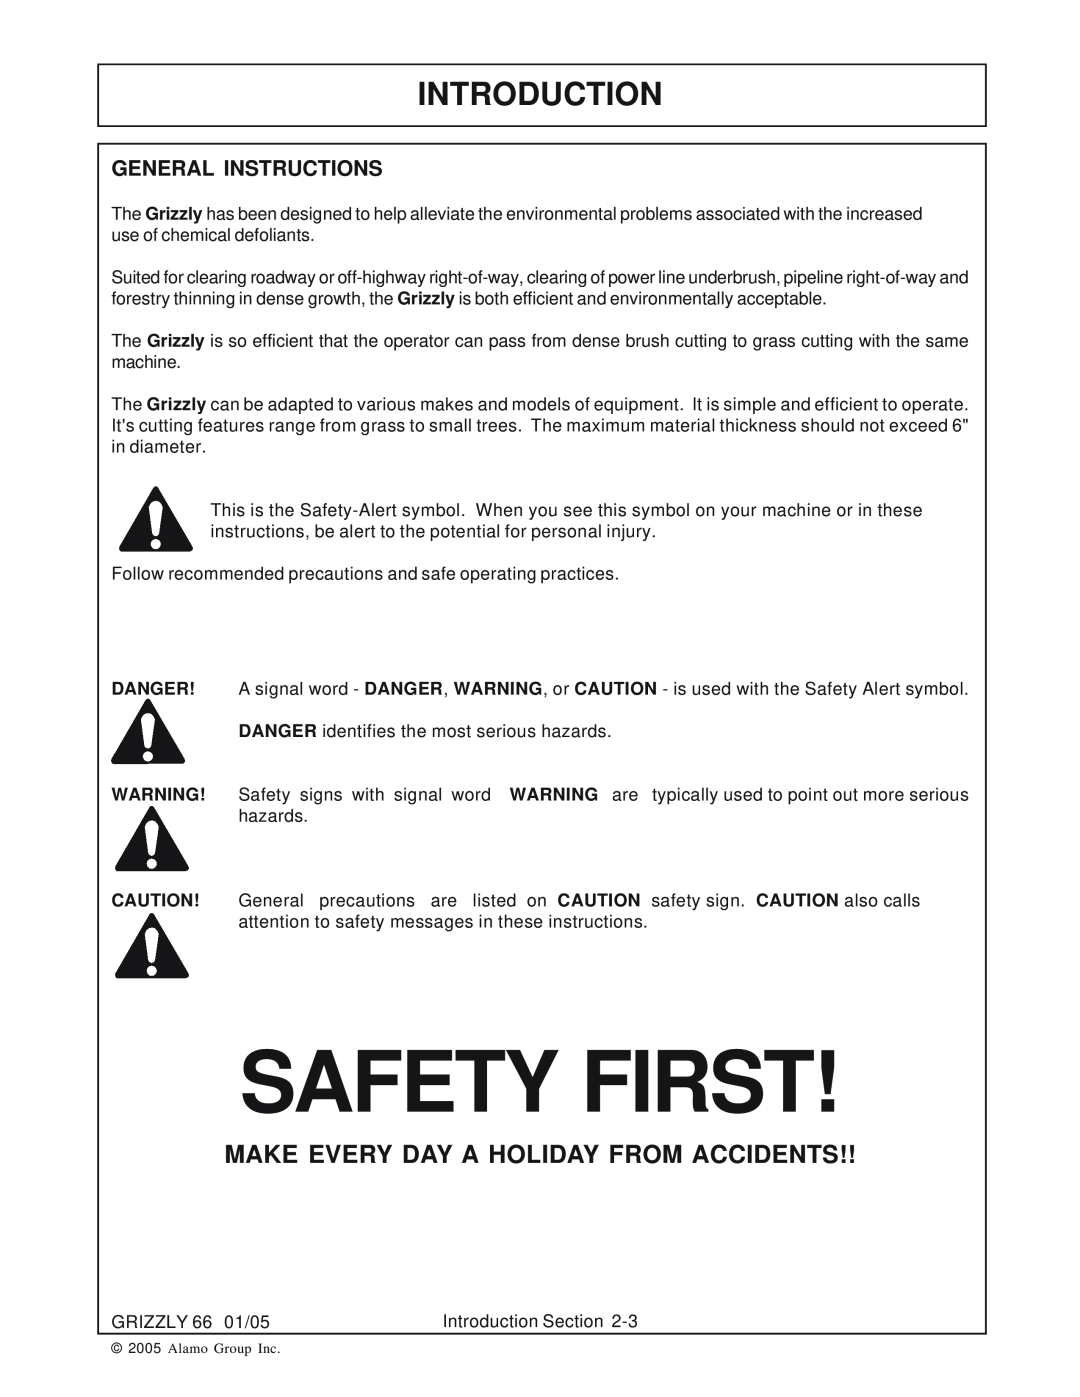 Alamo 66 manual Make Every Day A Holiday From Accidents, Safety First, Introduction 